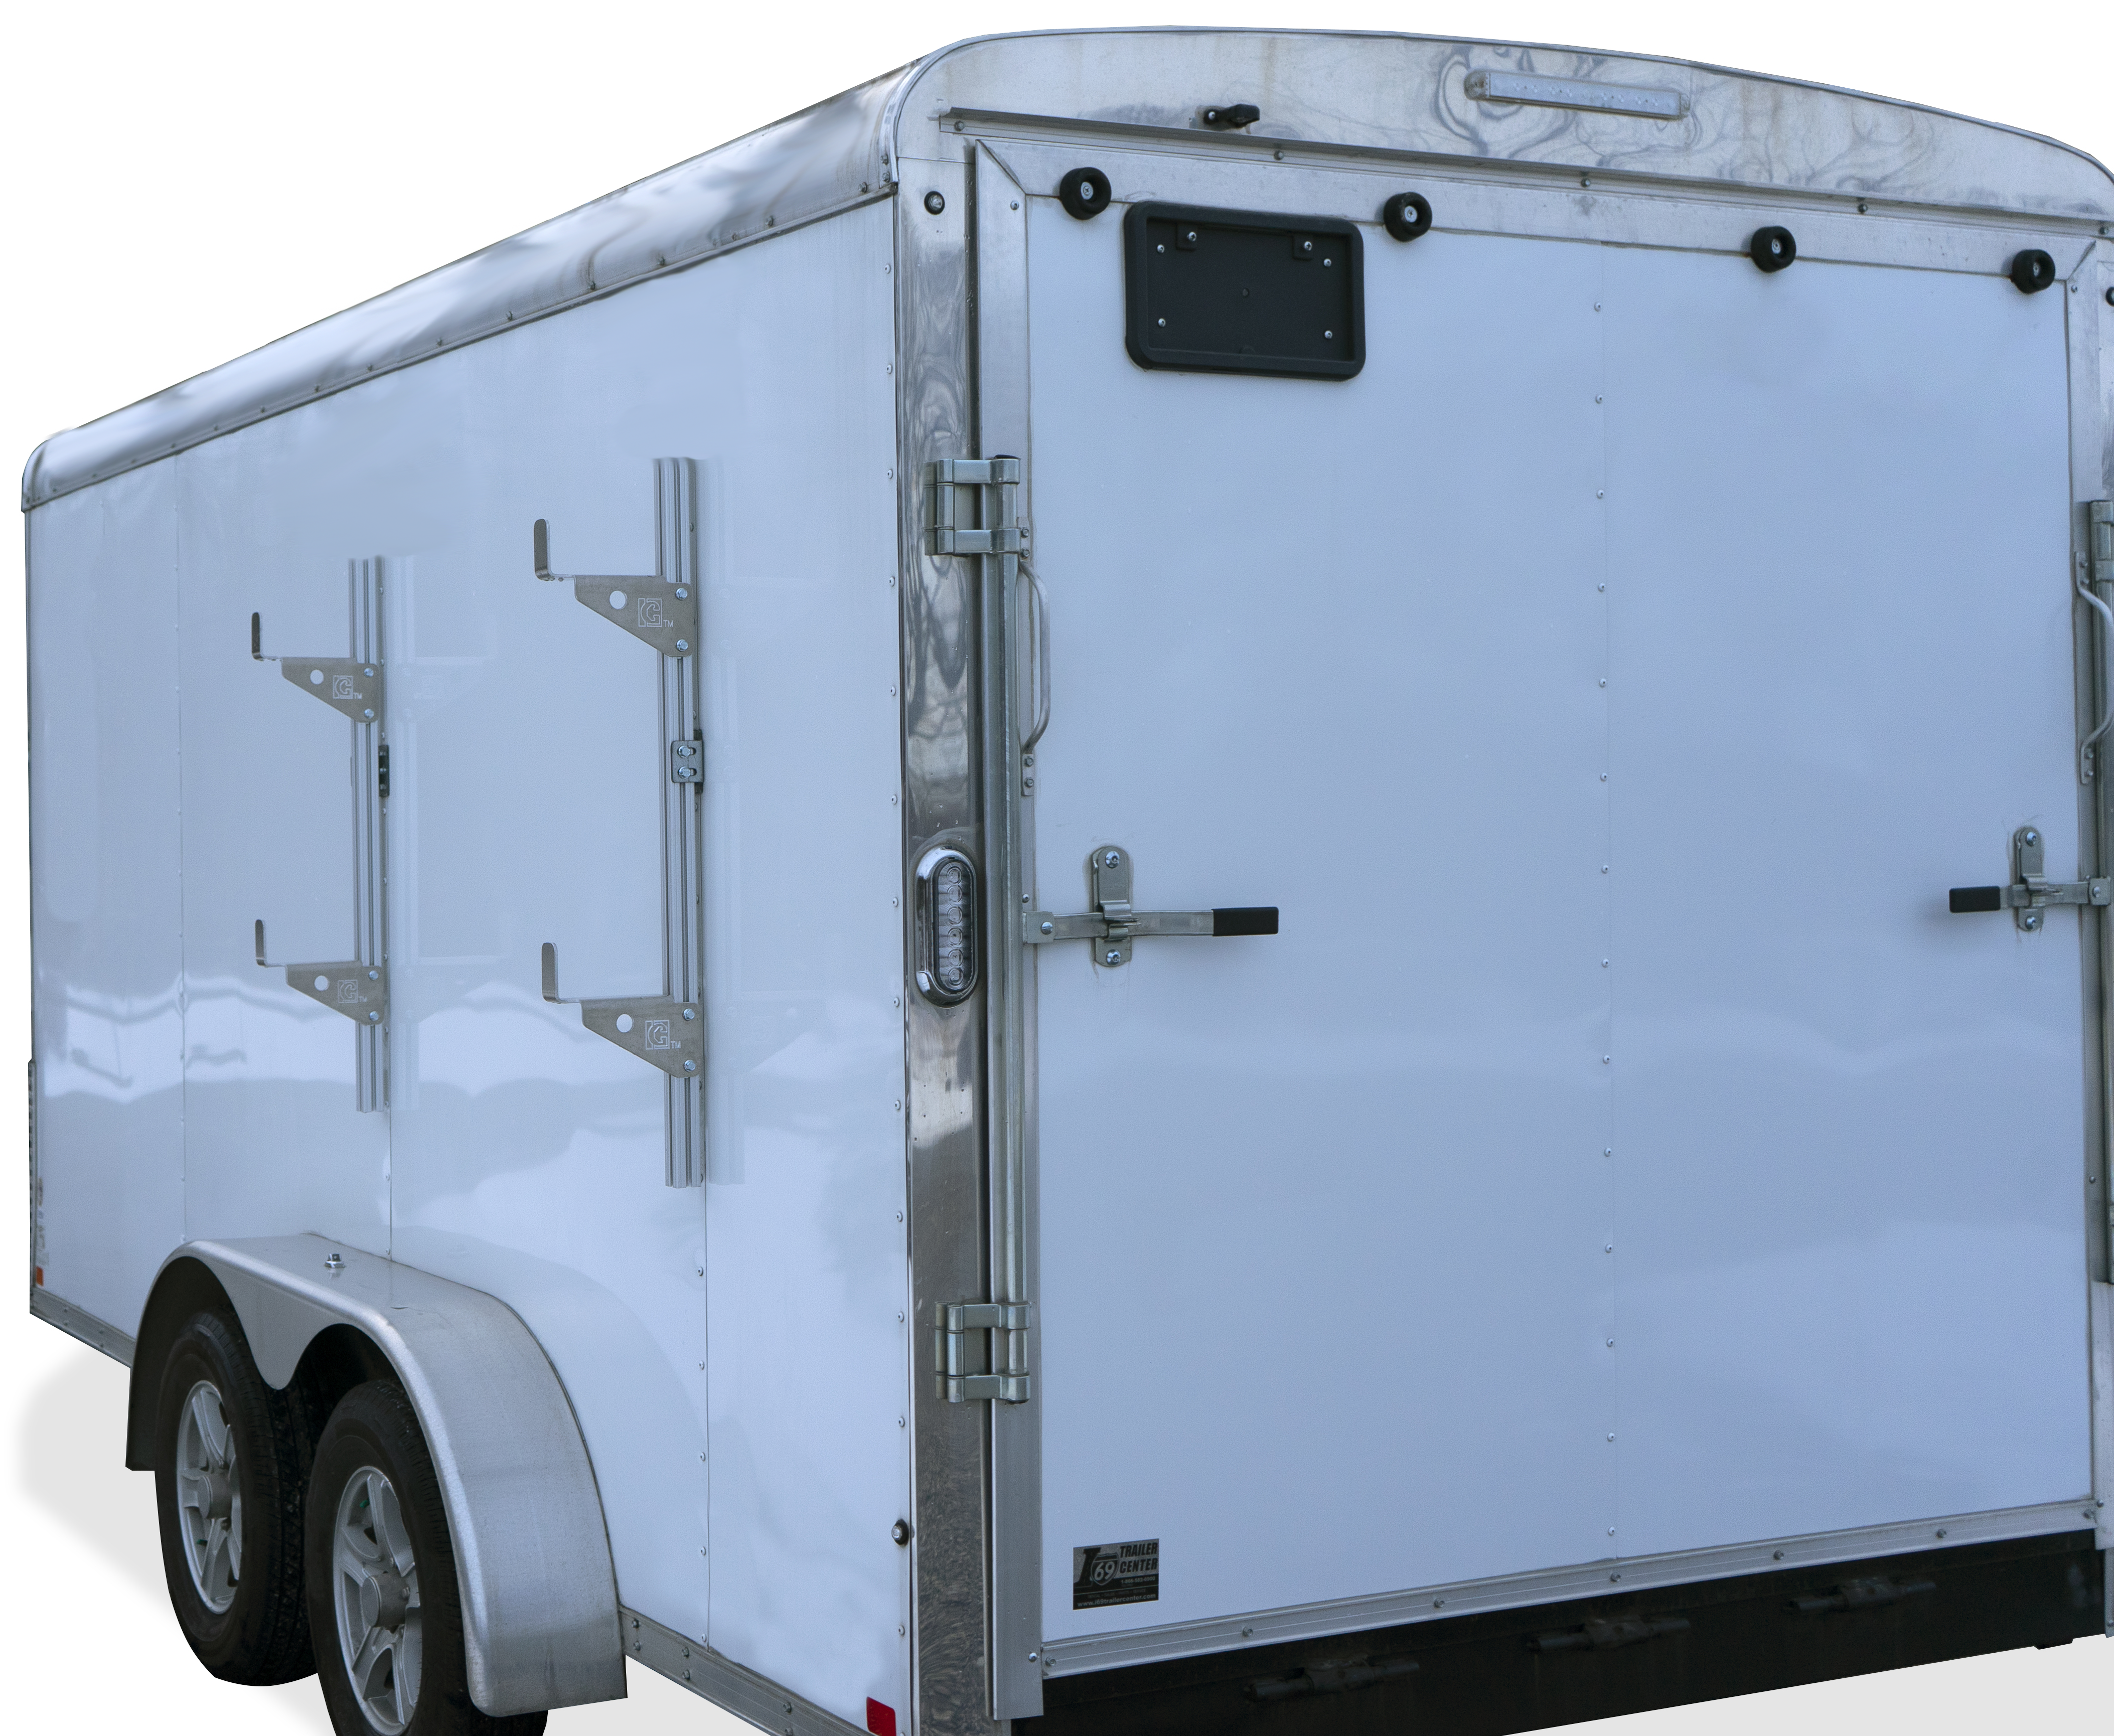 enclosed trailer with ladders side mounted on racks